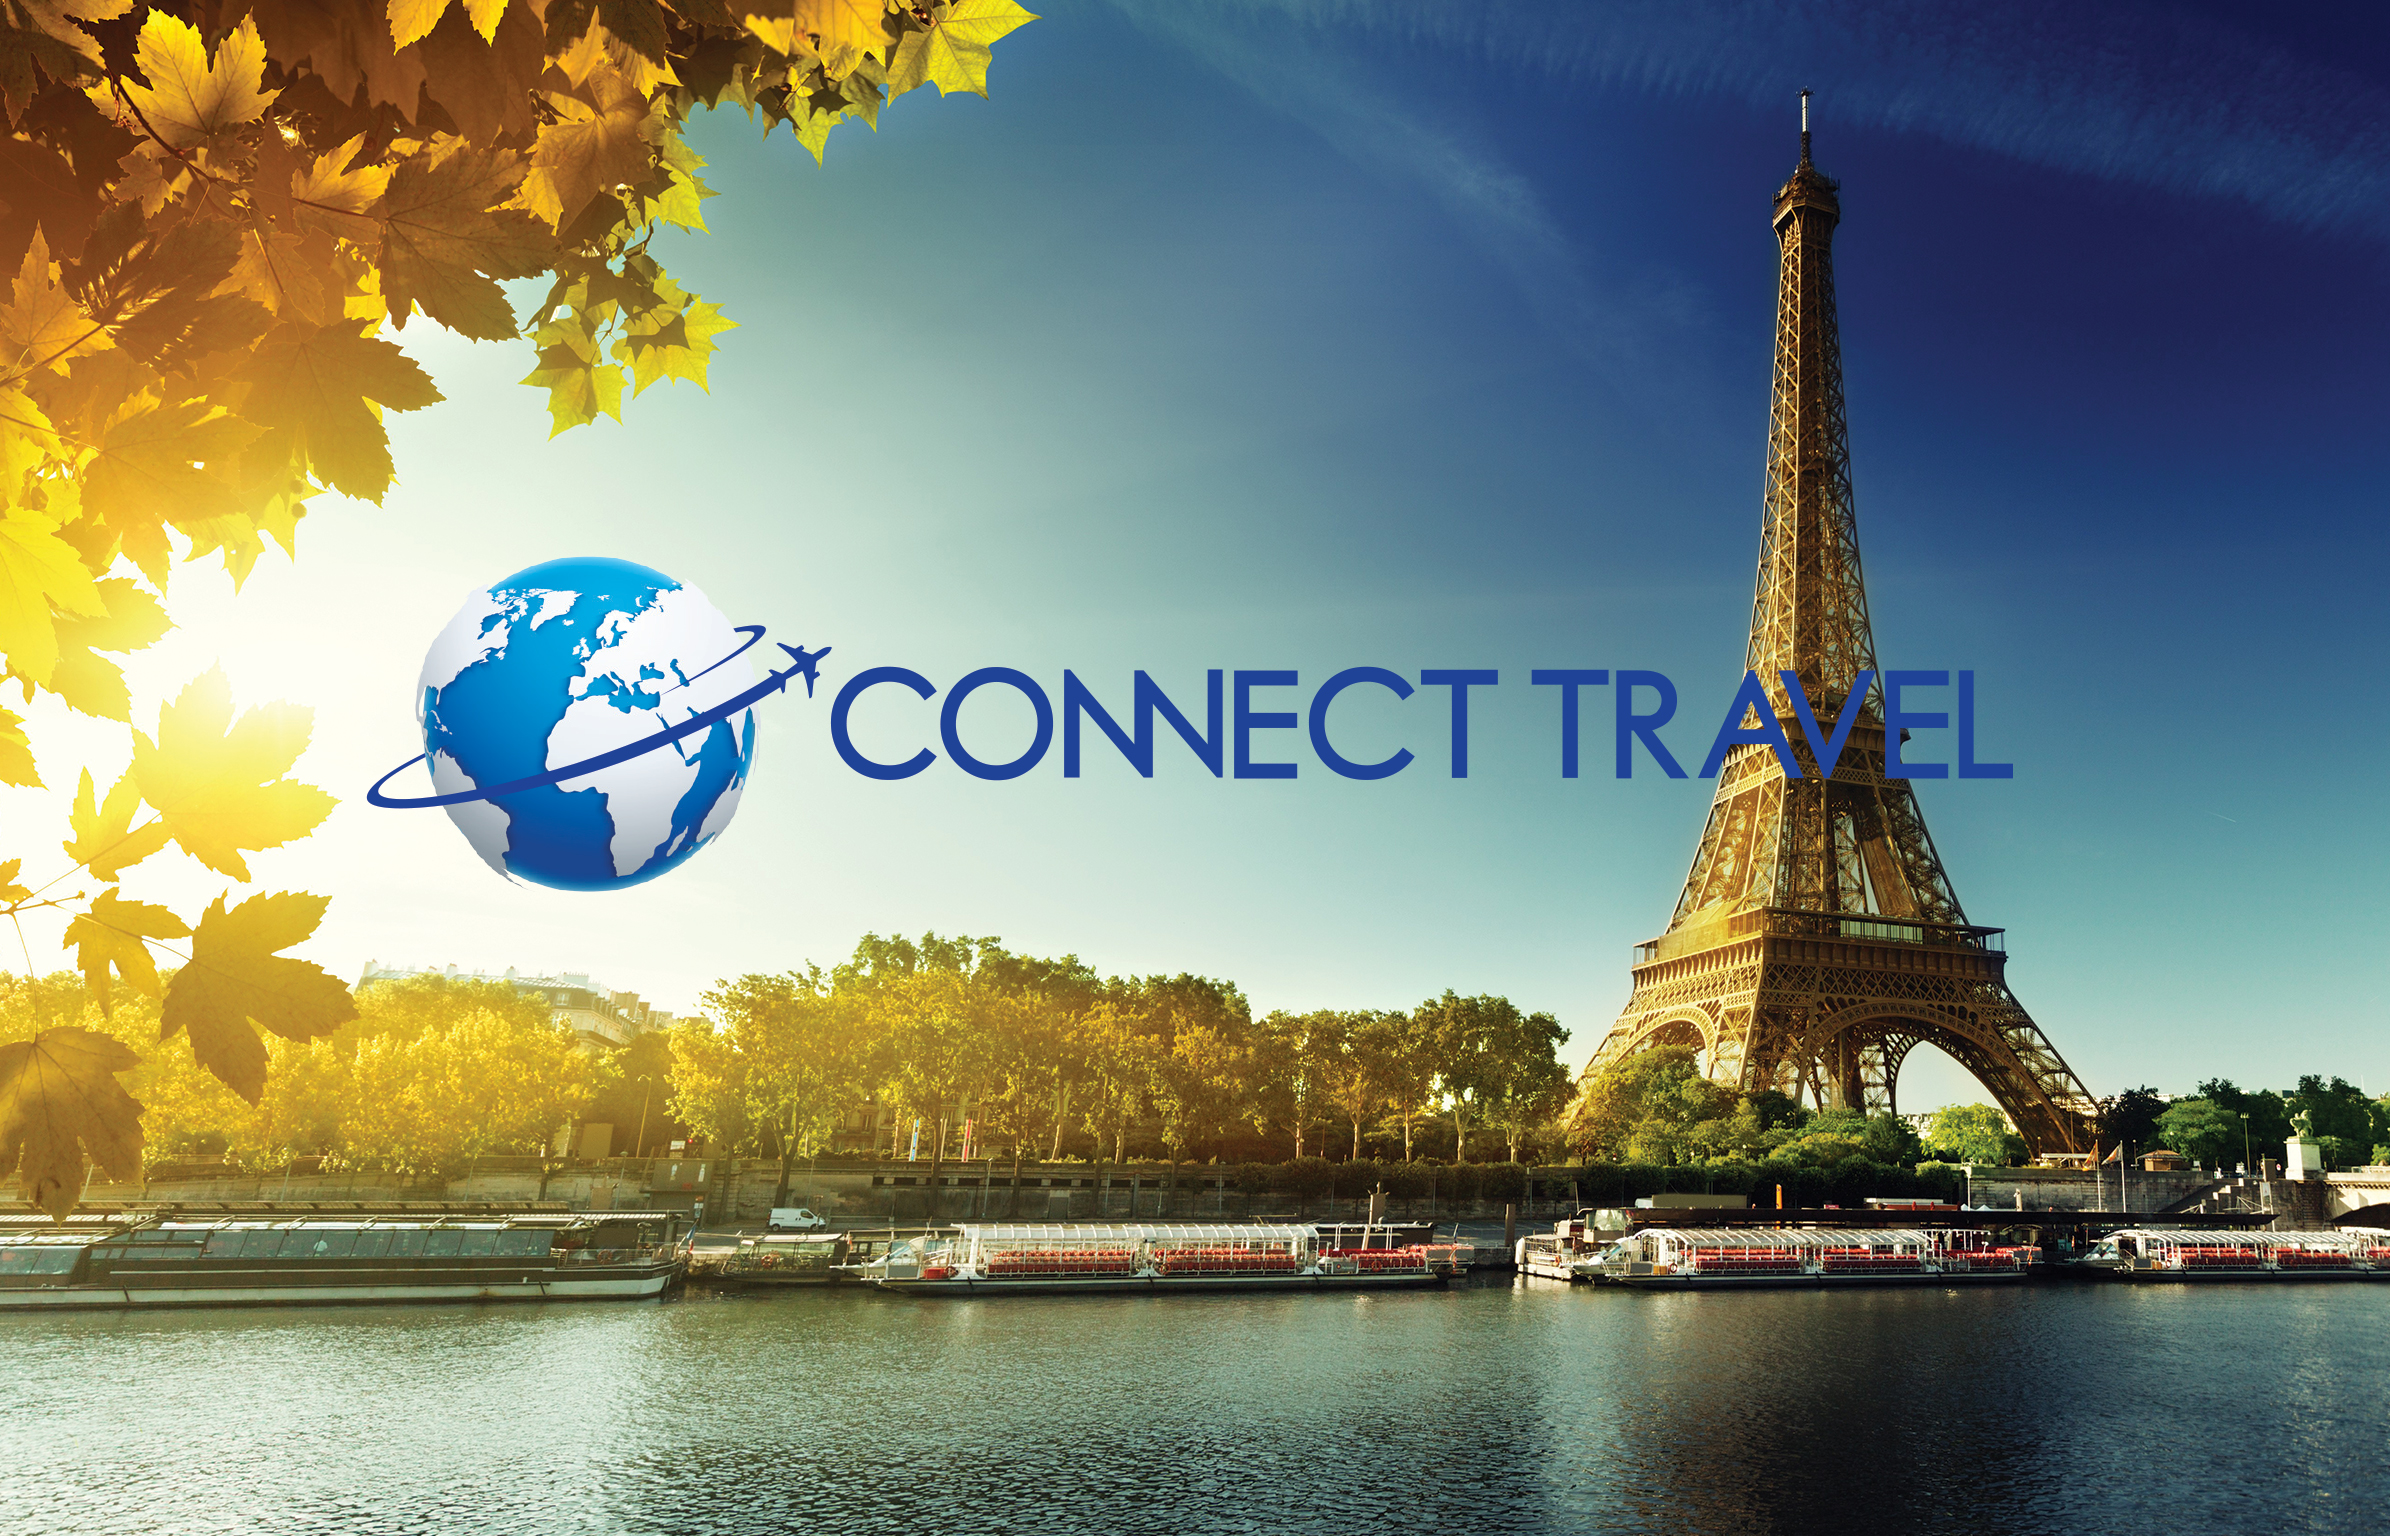 Connect Travel